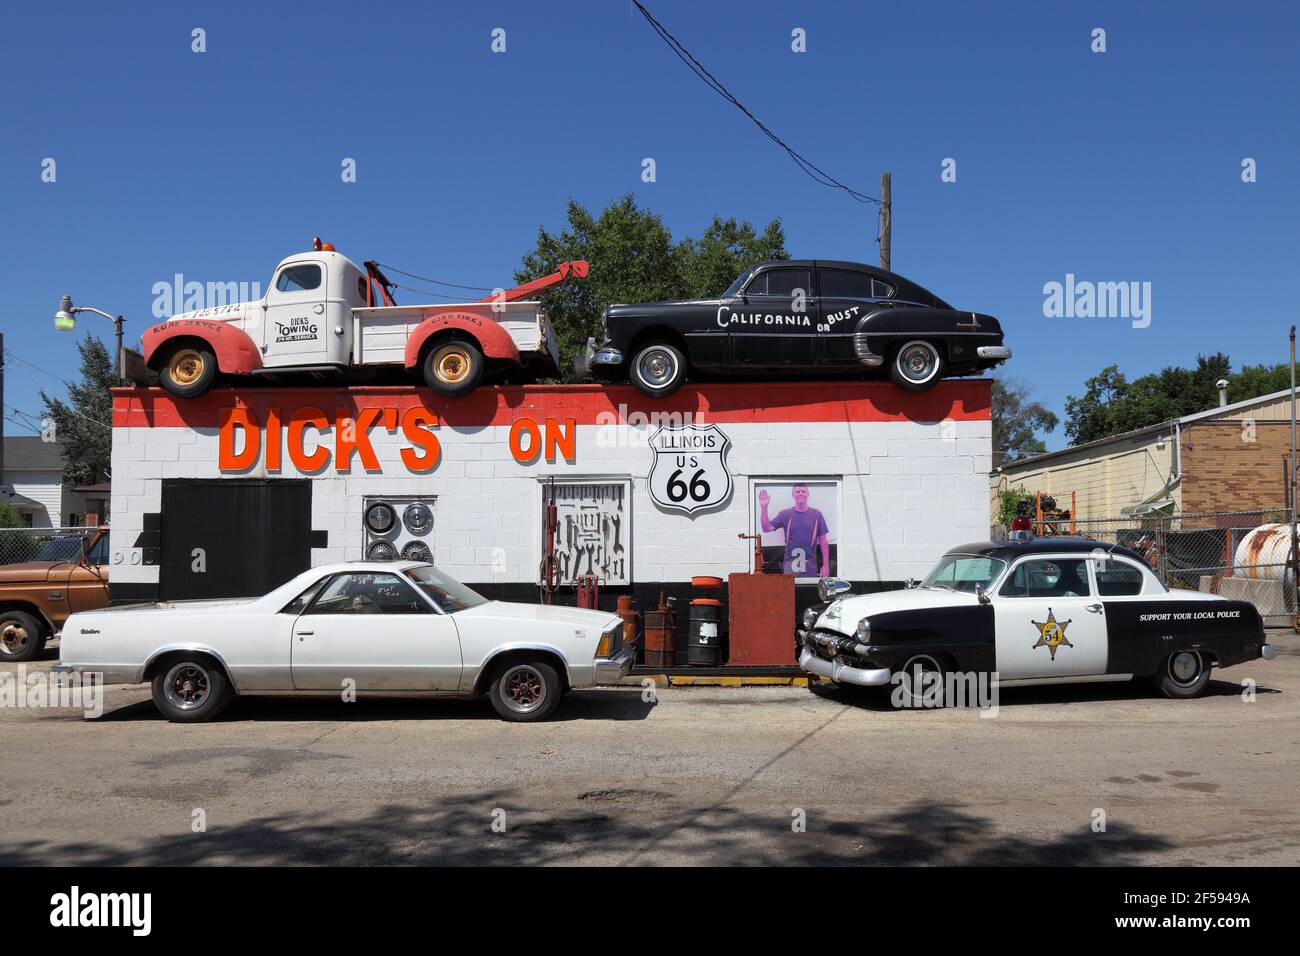 Geographie / Reisen, USA, Illinois, Joliet, Dick's Route 66 Towing, Broadwa, Additional-Rights-Clearance-Info-not-available Stockfoto